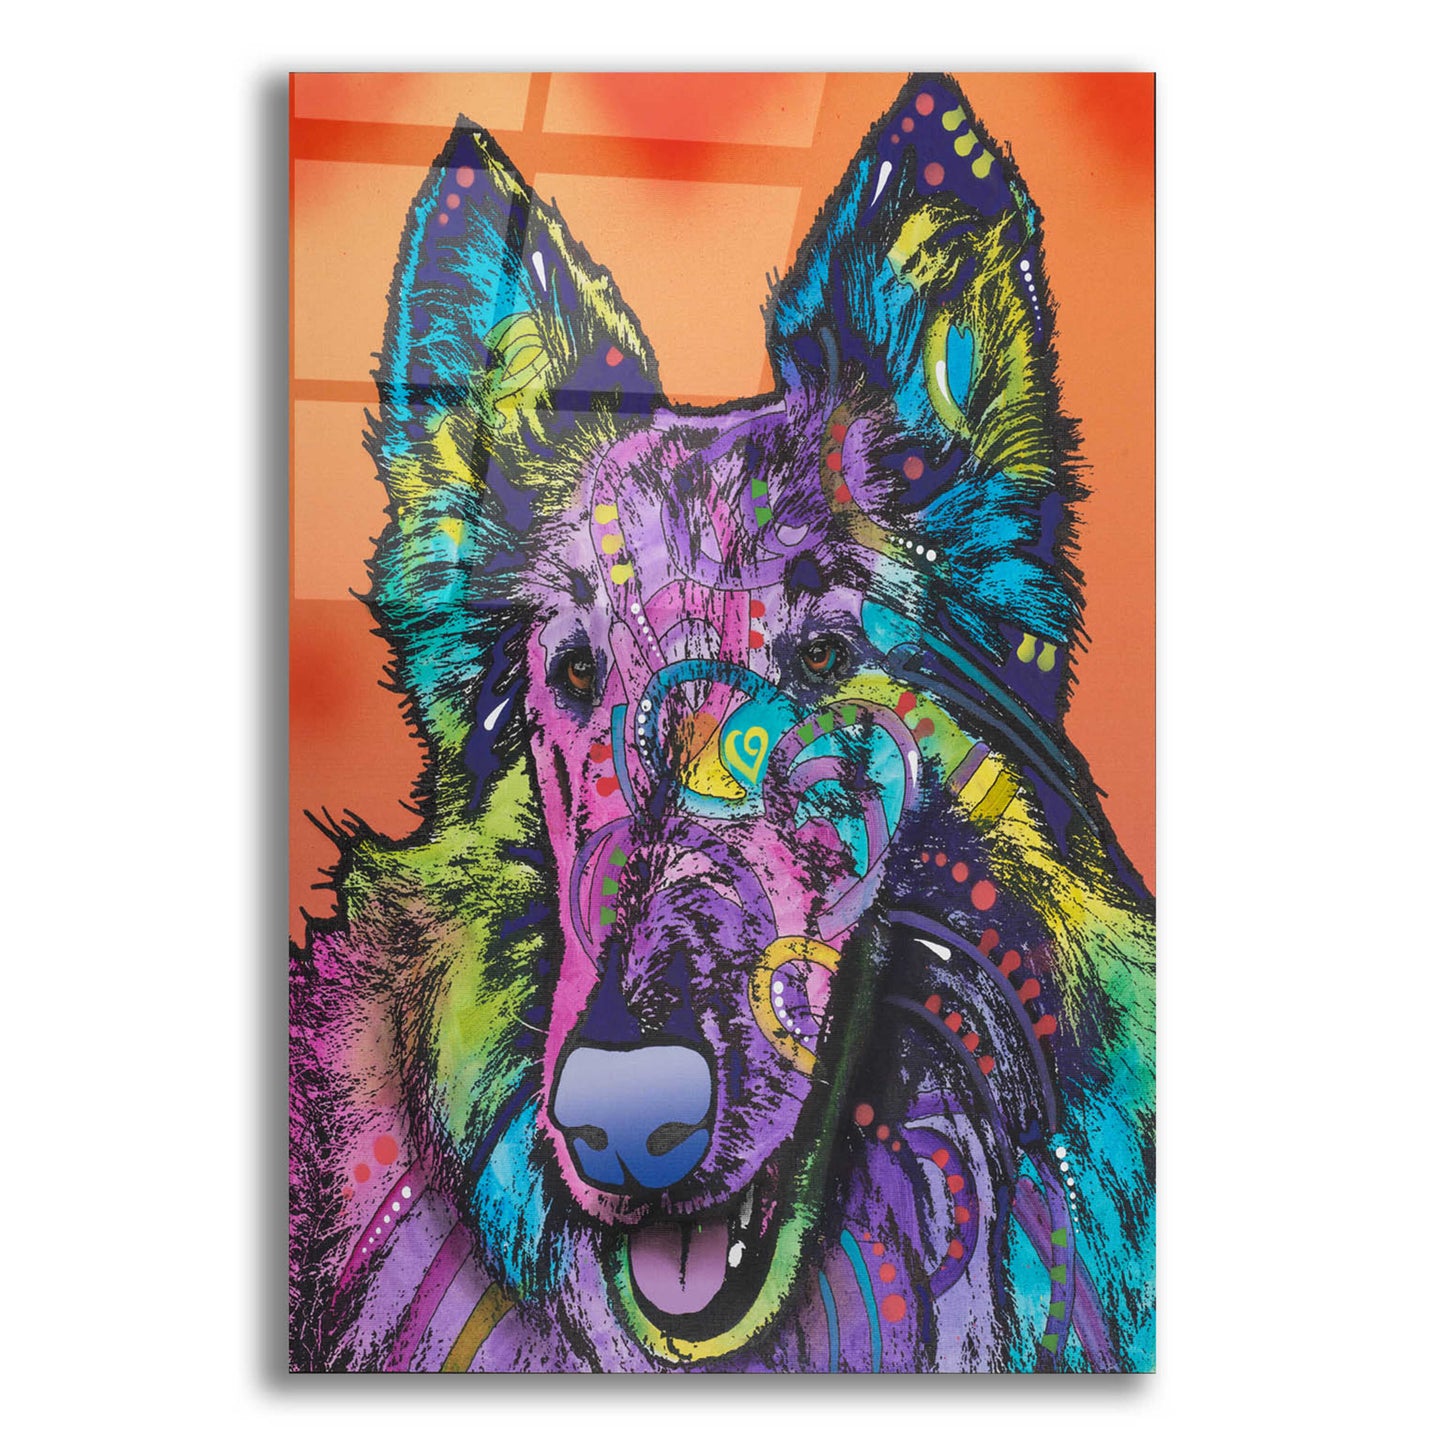 Epic Art 'Ava' by Dean Russo, Acrylic Glass Wall Art,16x24